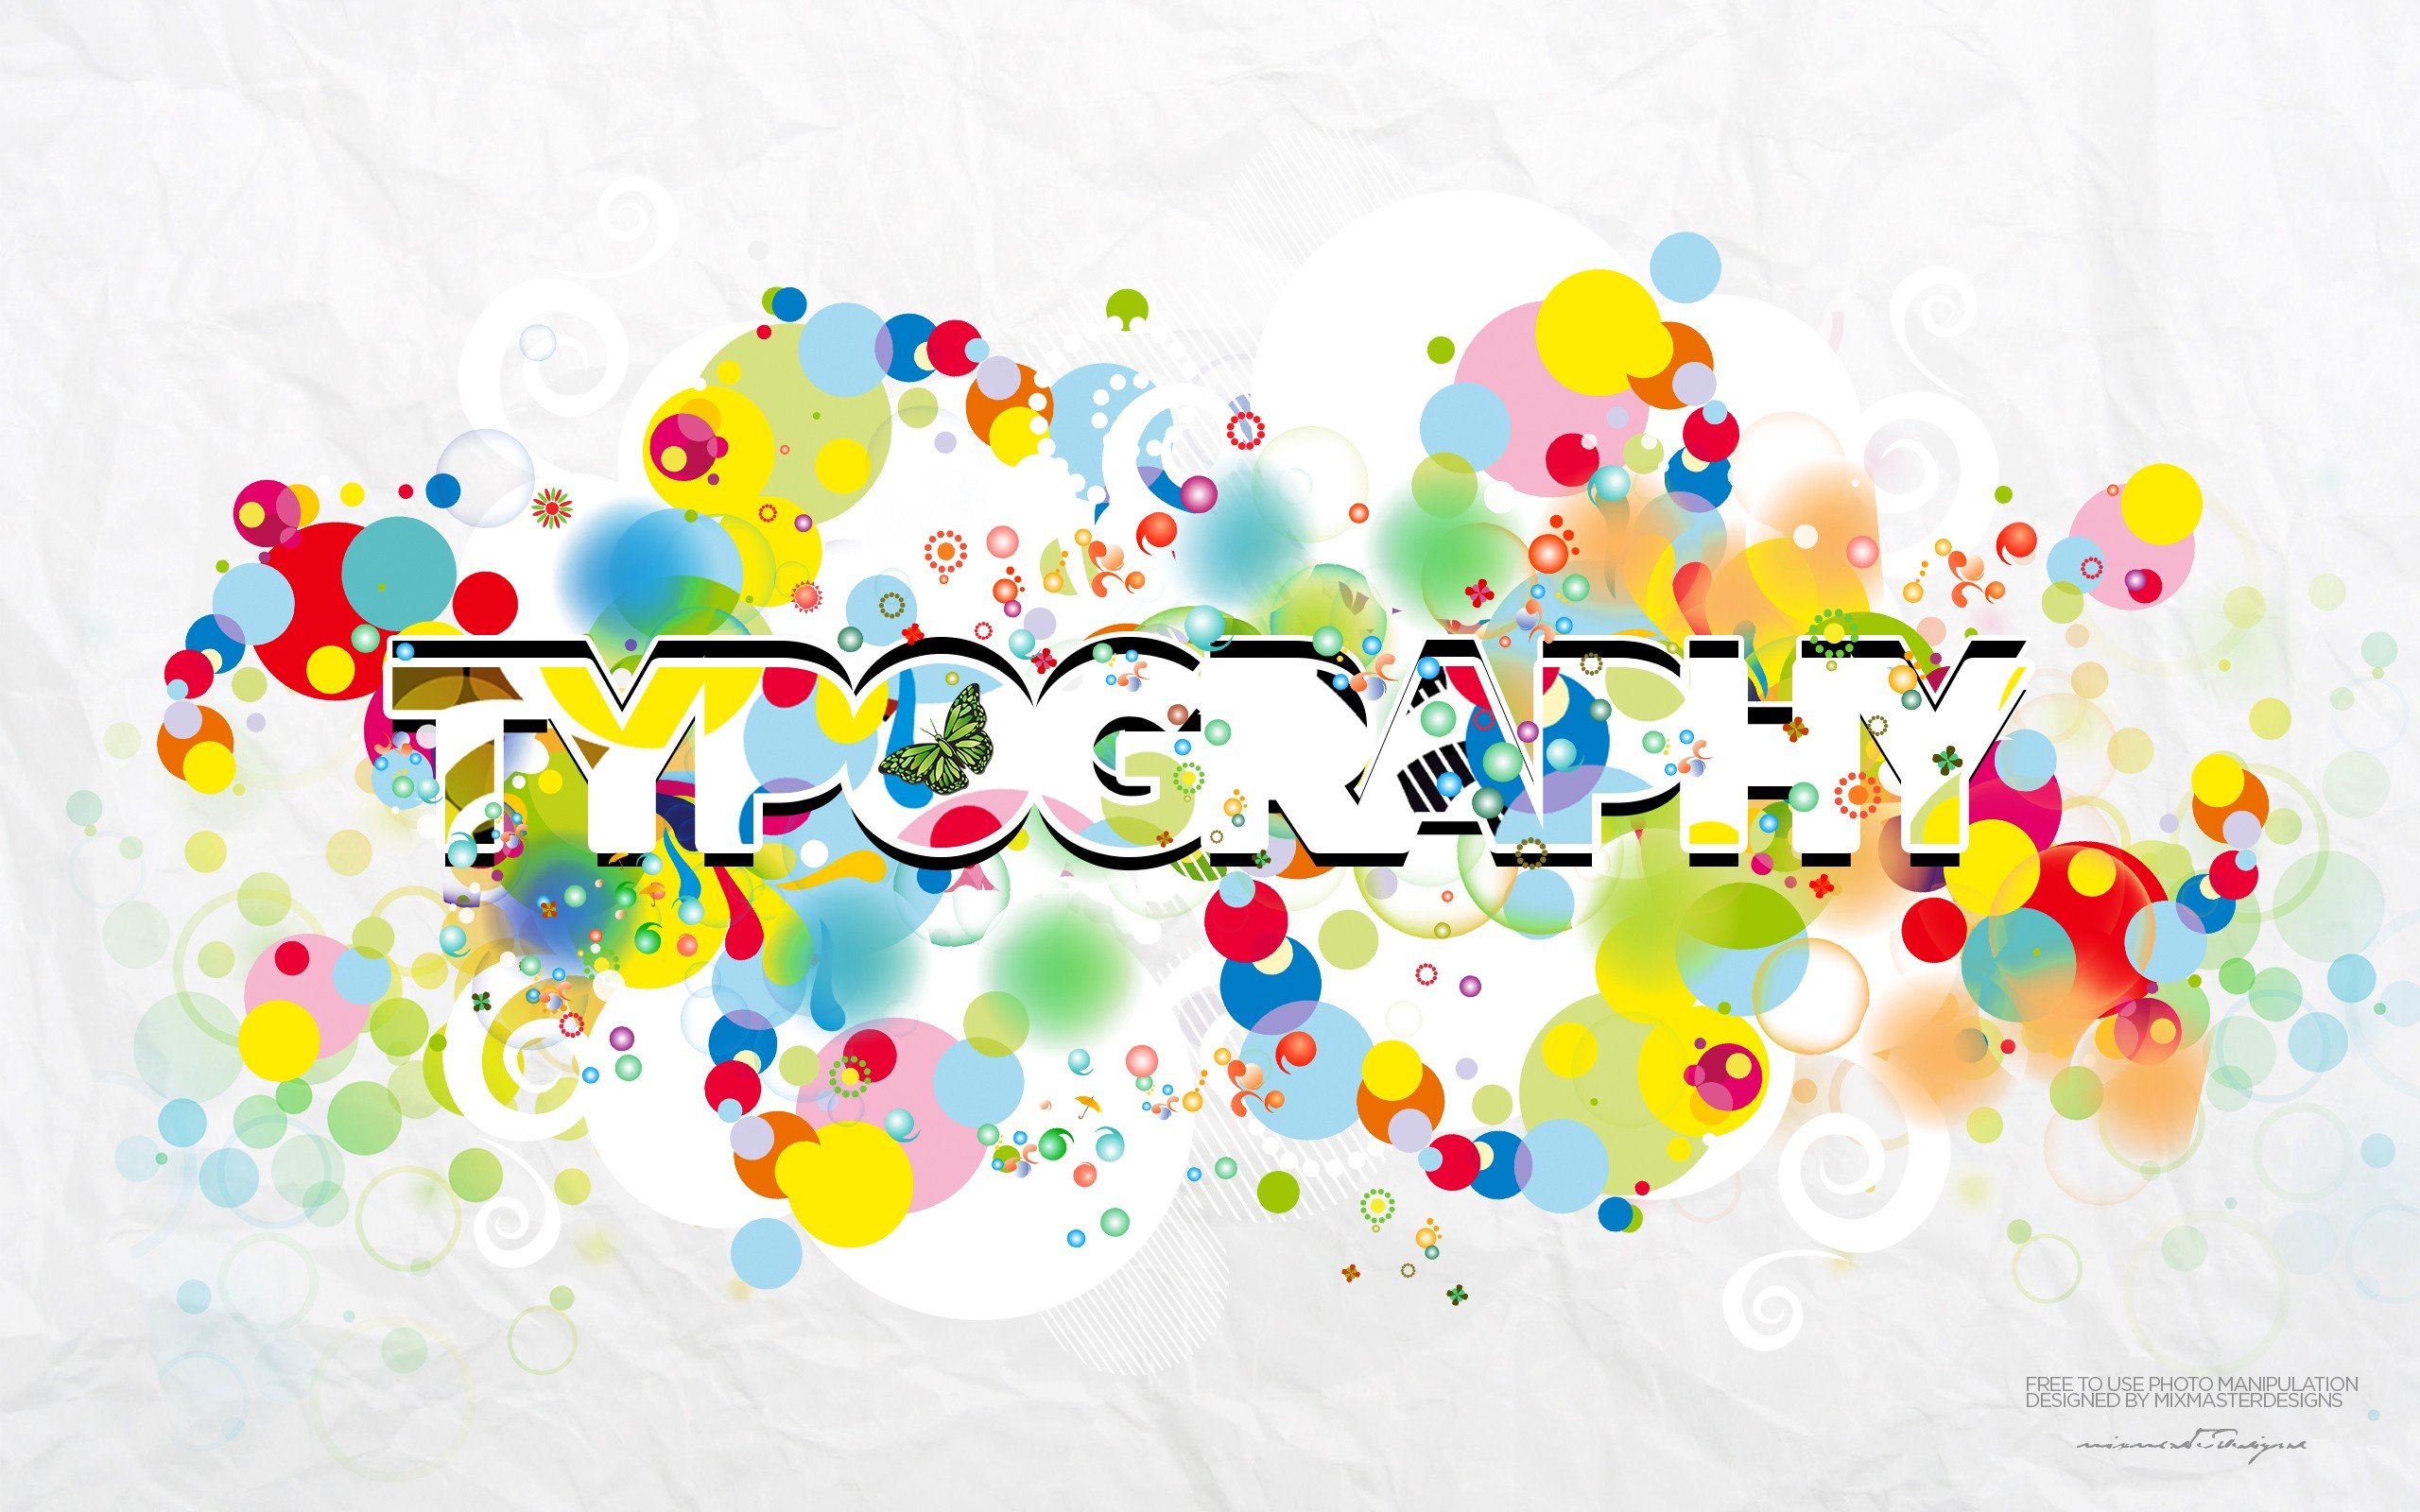 photo manipulation, Typography, Graphic design, Colorful, Circle Wallpaper